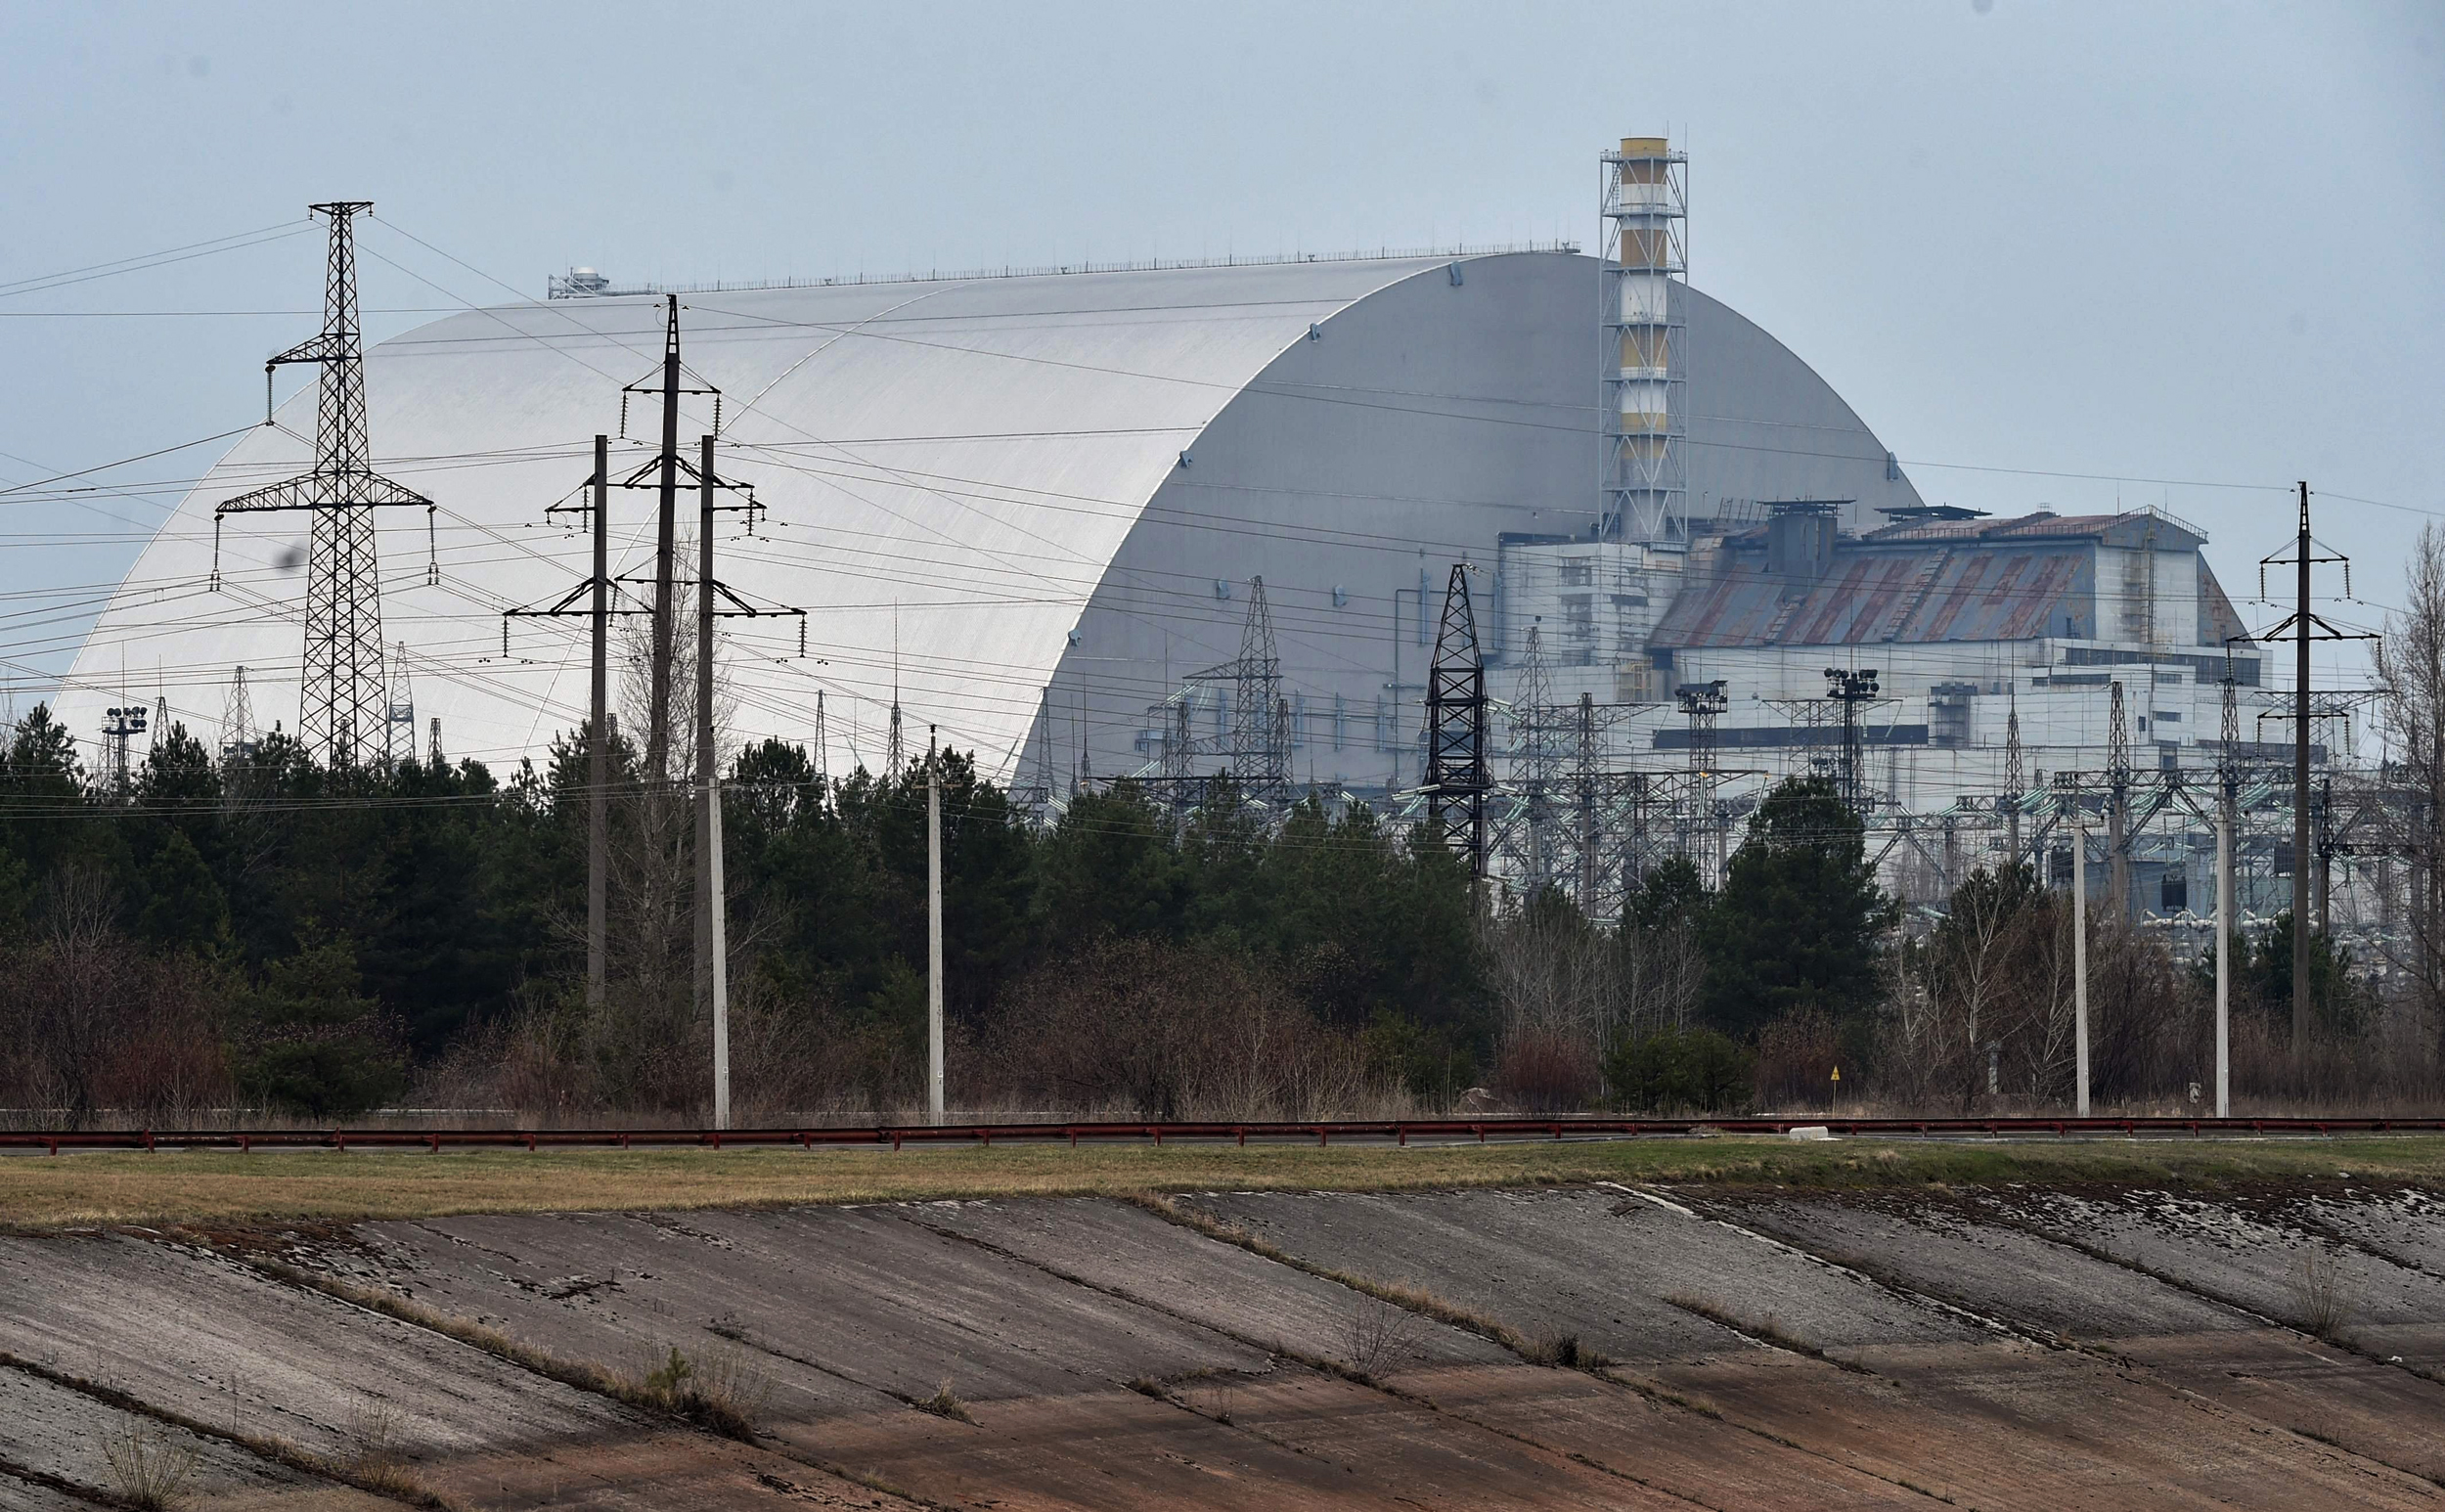 (FILES) A file picture taken on April 13, 2021 shows the giant protective dome built over the sarcophagus covering the destroyed fourth reactor of the Chernobyl Nuclear Power Plant ahead of the upcoming 35th anniversary of the Chernobyl nuclear disaster. - Ukraine announced on February 24 that Russian forces had captured the Chernobyl nuclear power plant after a "fierce" battle on the first day of the Kremlin's invasion of its ex-Soviet neighbour. "After the absolutely senseless attack of the Russians in this direction, it is impossible to say that the Chernobyl nuclear power plant is safe. This is one of the most serious threats to Europe today," said Mykhailo Podolyak, advisor to the chief of the presidential administration. (Photo by Sergei SUPINSKY / AFP) (Photo by SERGEI SUPINSKY/AFP via Getty Images)